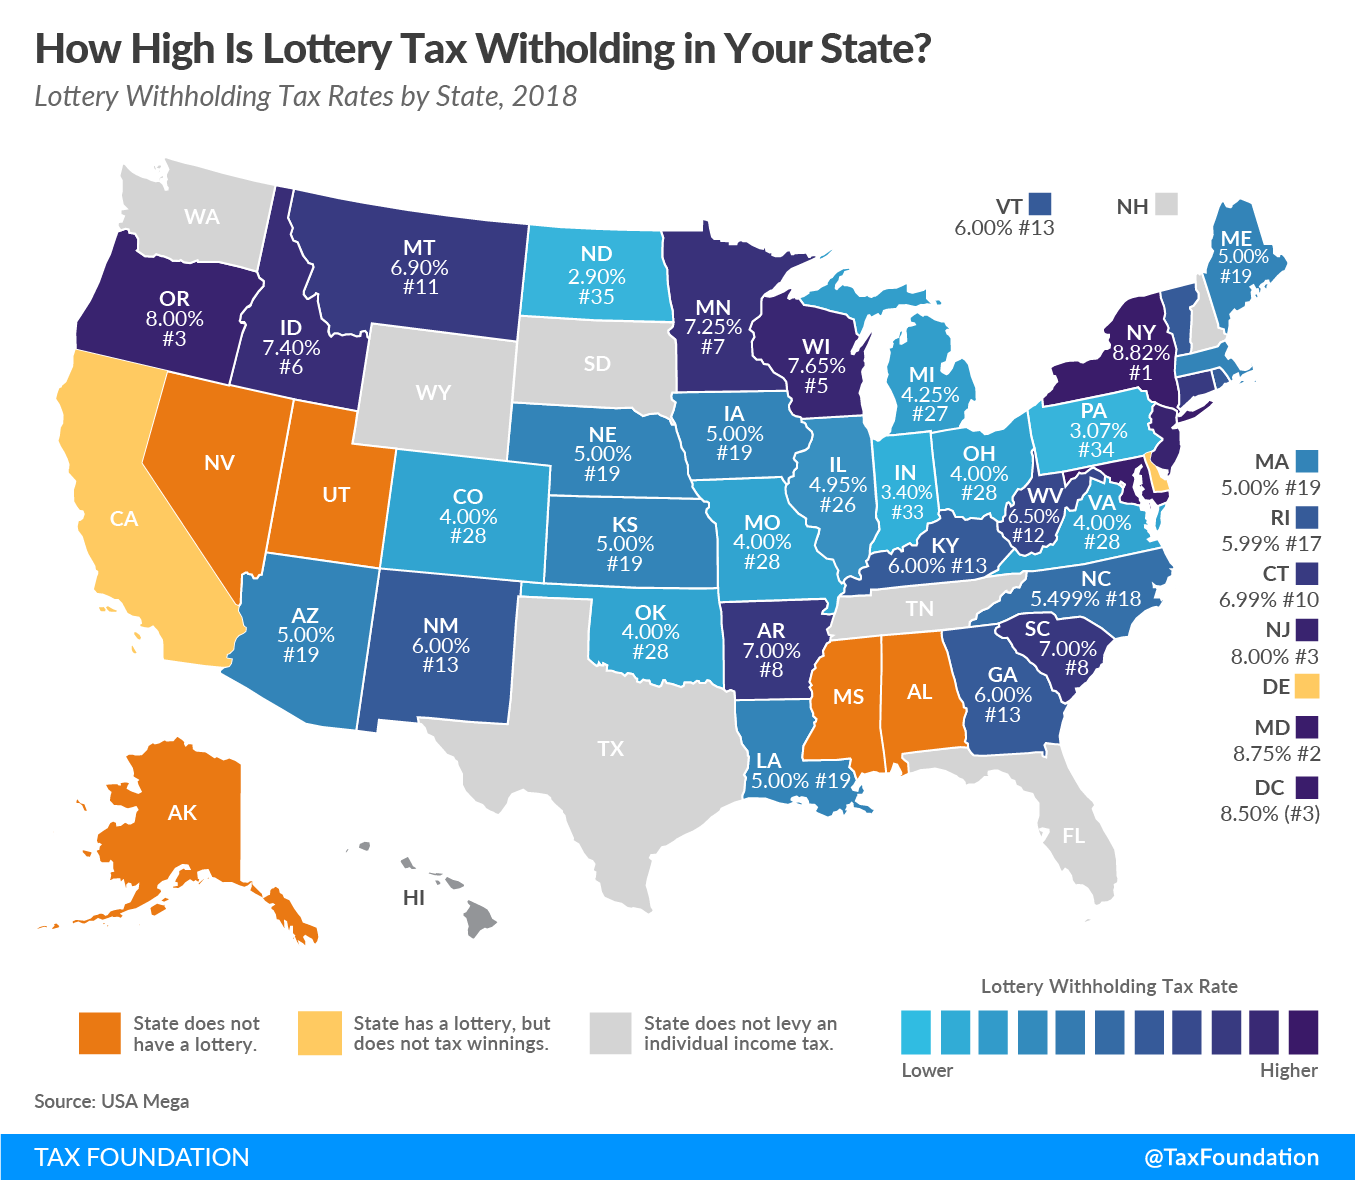 What Percentage of Lottery Winnings Would be Withheld in Your State?